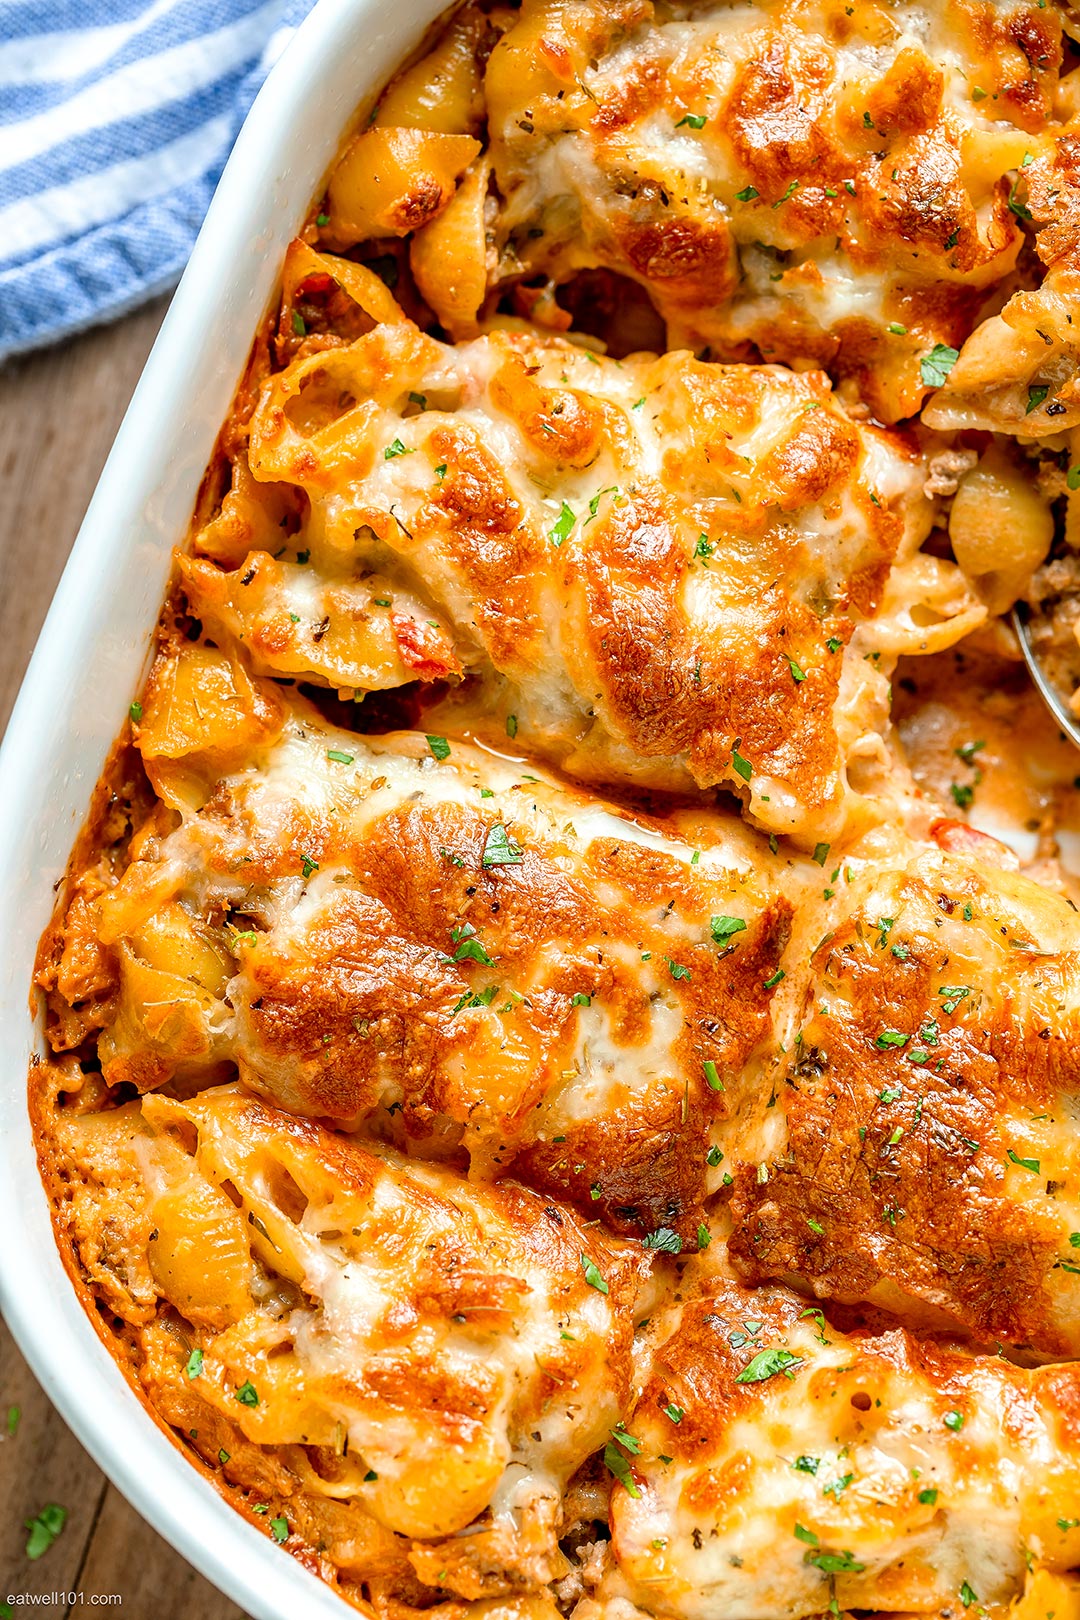 Cheesy Baked Pasta Recipe with Creamy Meat Sauce – Baked Pasta